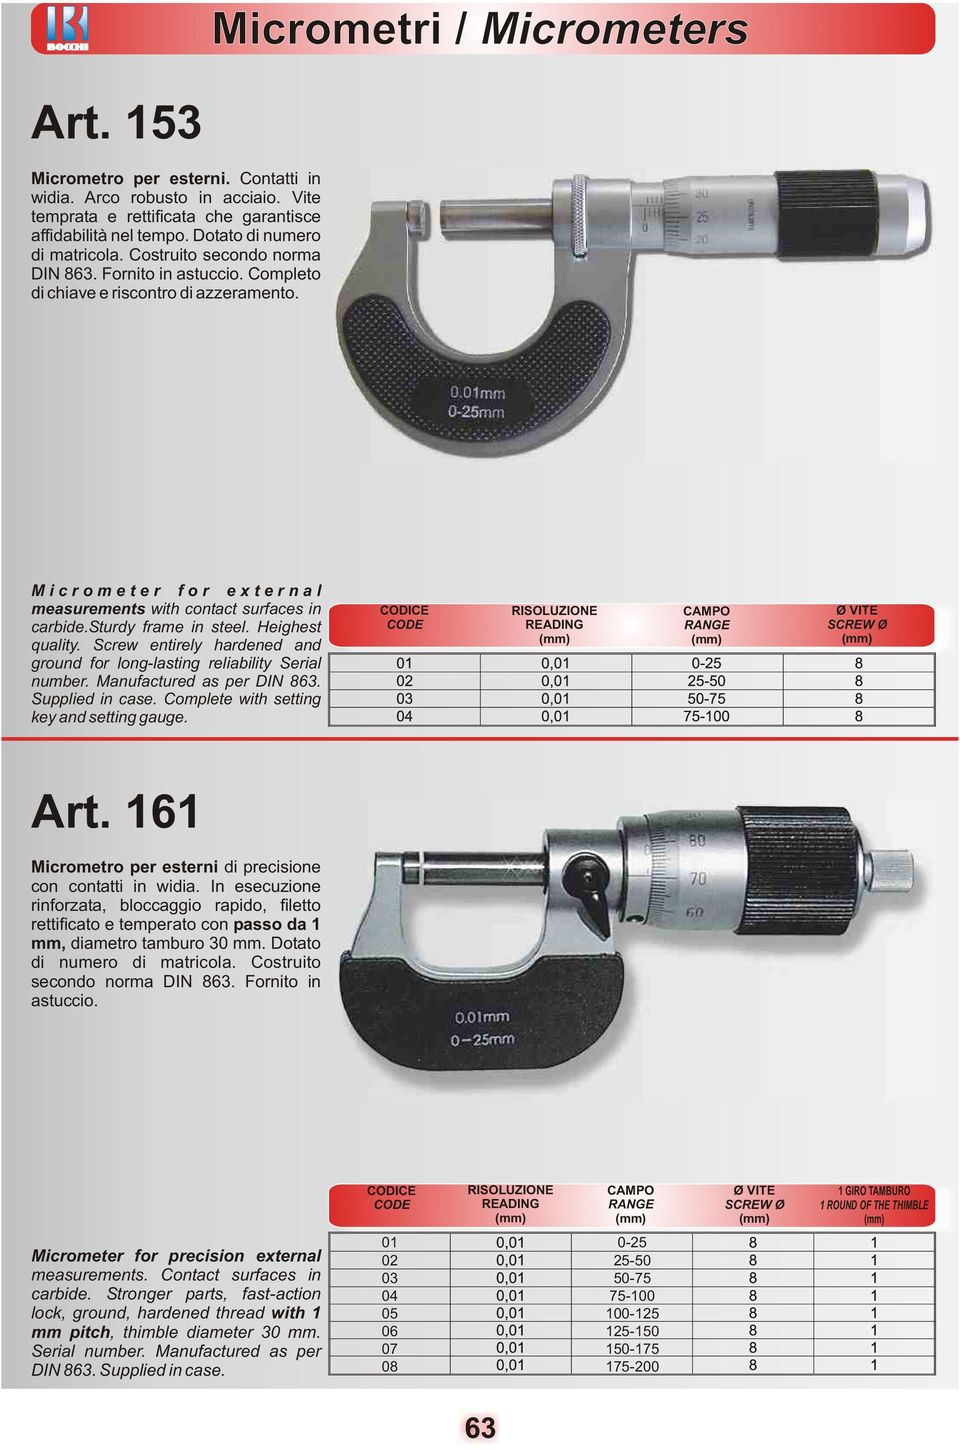 Screw entirely hardened and ground for longlasting reliability Serial number. Manufactured as per DIN 63. Supplied in case. Complete with setting key and setting gauge. Art.